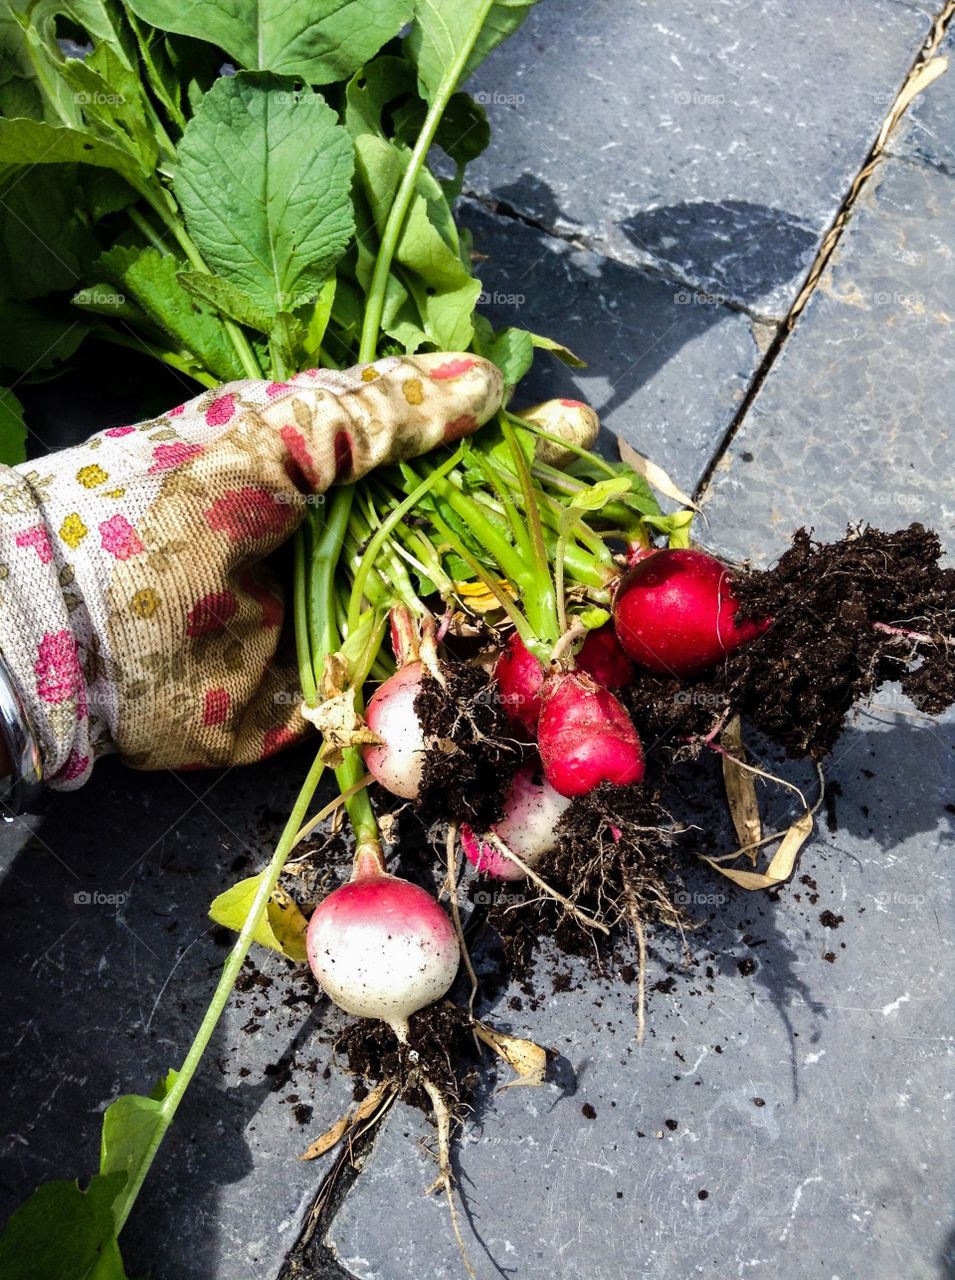 Person's hand holding fresh radishes